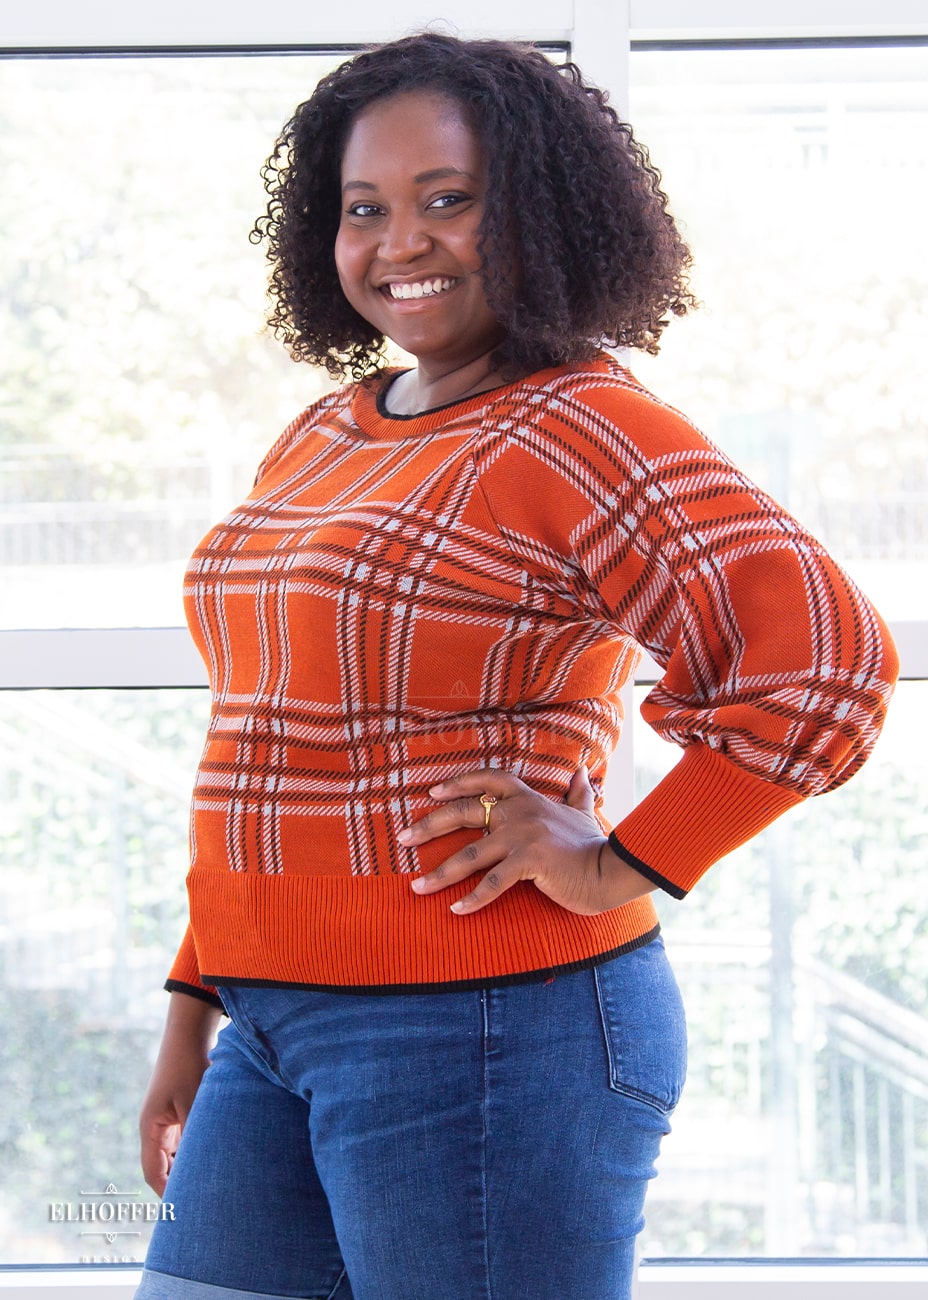 Maydelle, a medium dark skinned XL model with shoulder length curly dark brown hair, is wearing a cropped boatneck sweater with half length bishop sleeve in an orange, white, and black tartan.